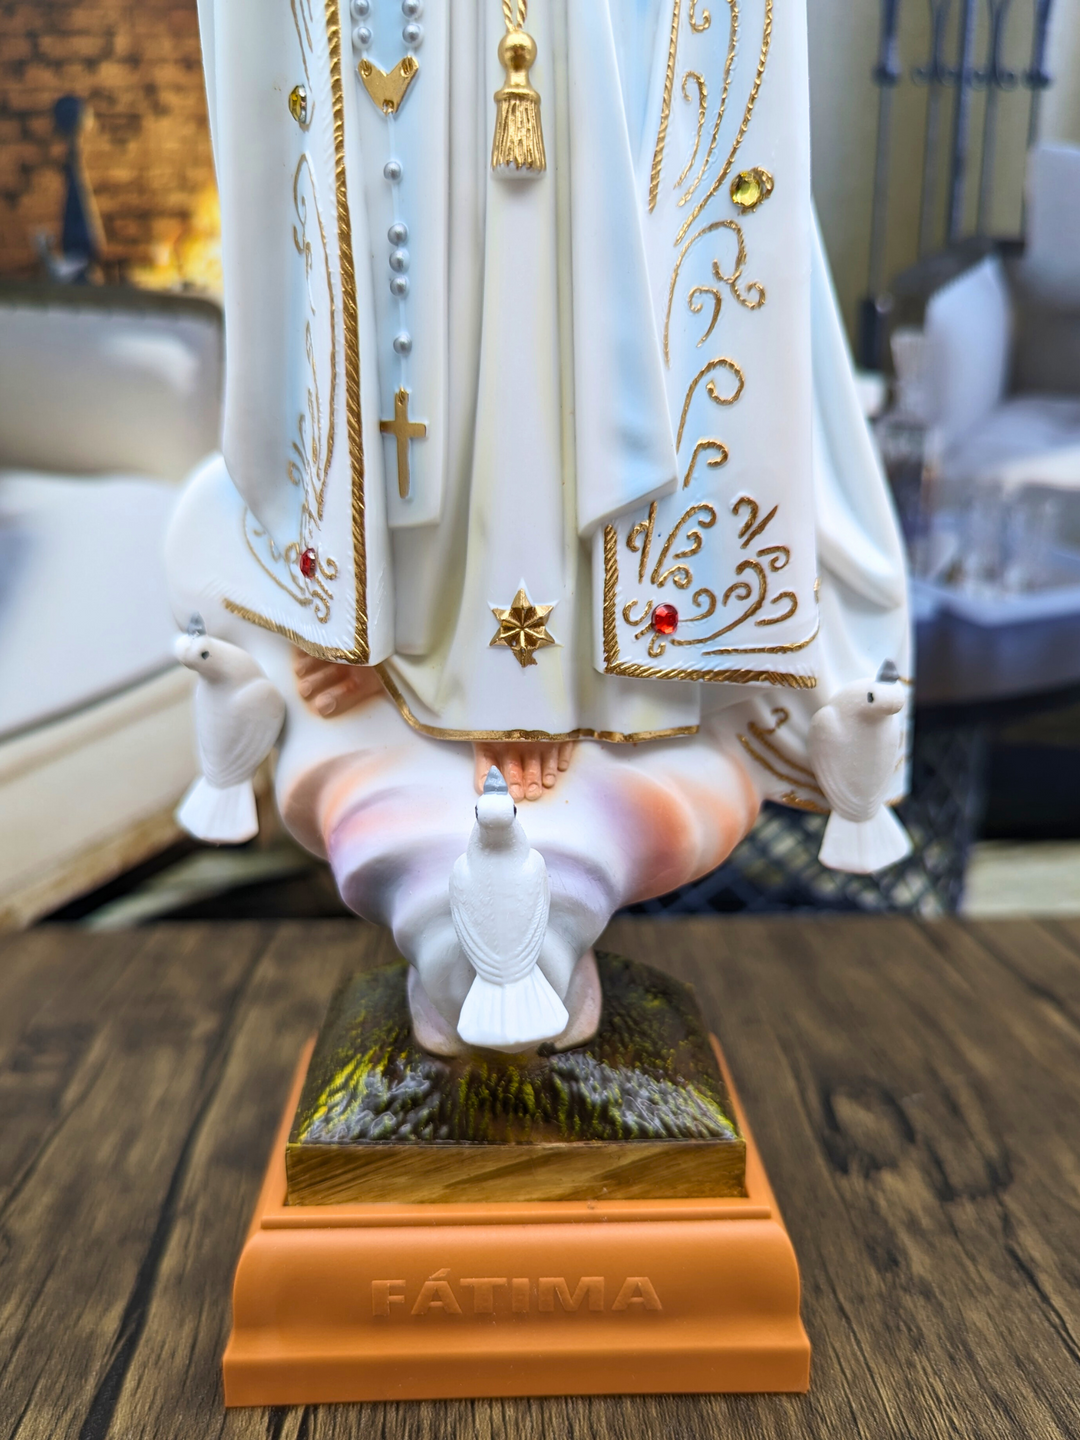 15 Inch Glass Eyes Our Lady of Fatima Statue Made in Portugal